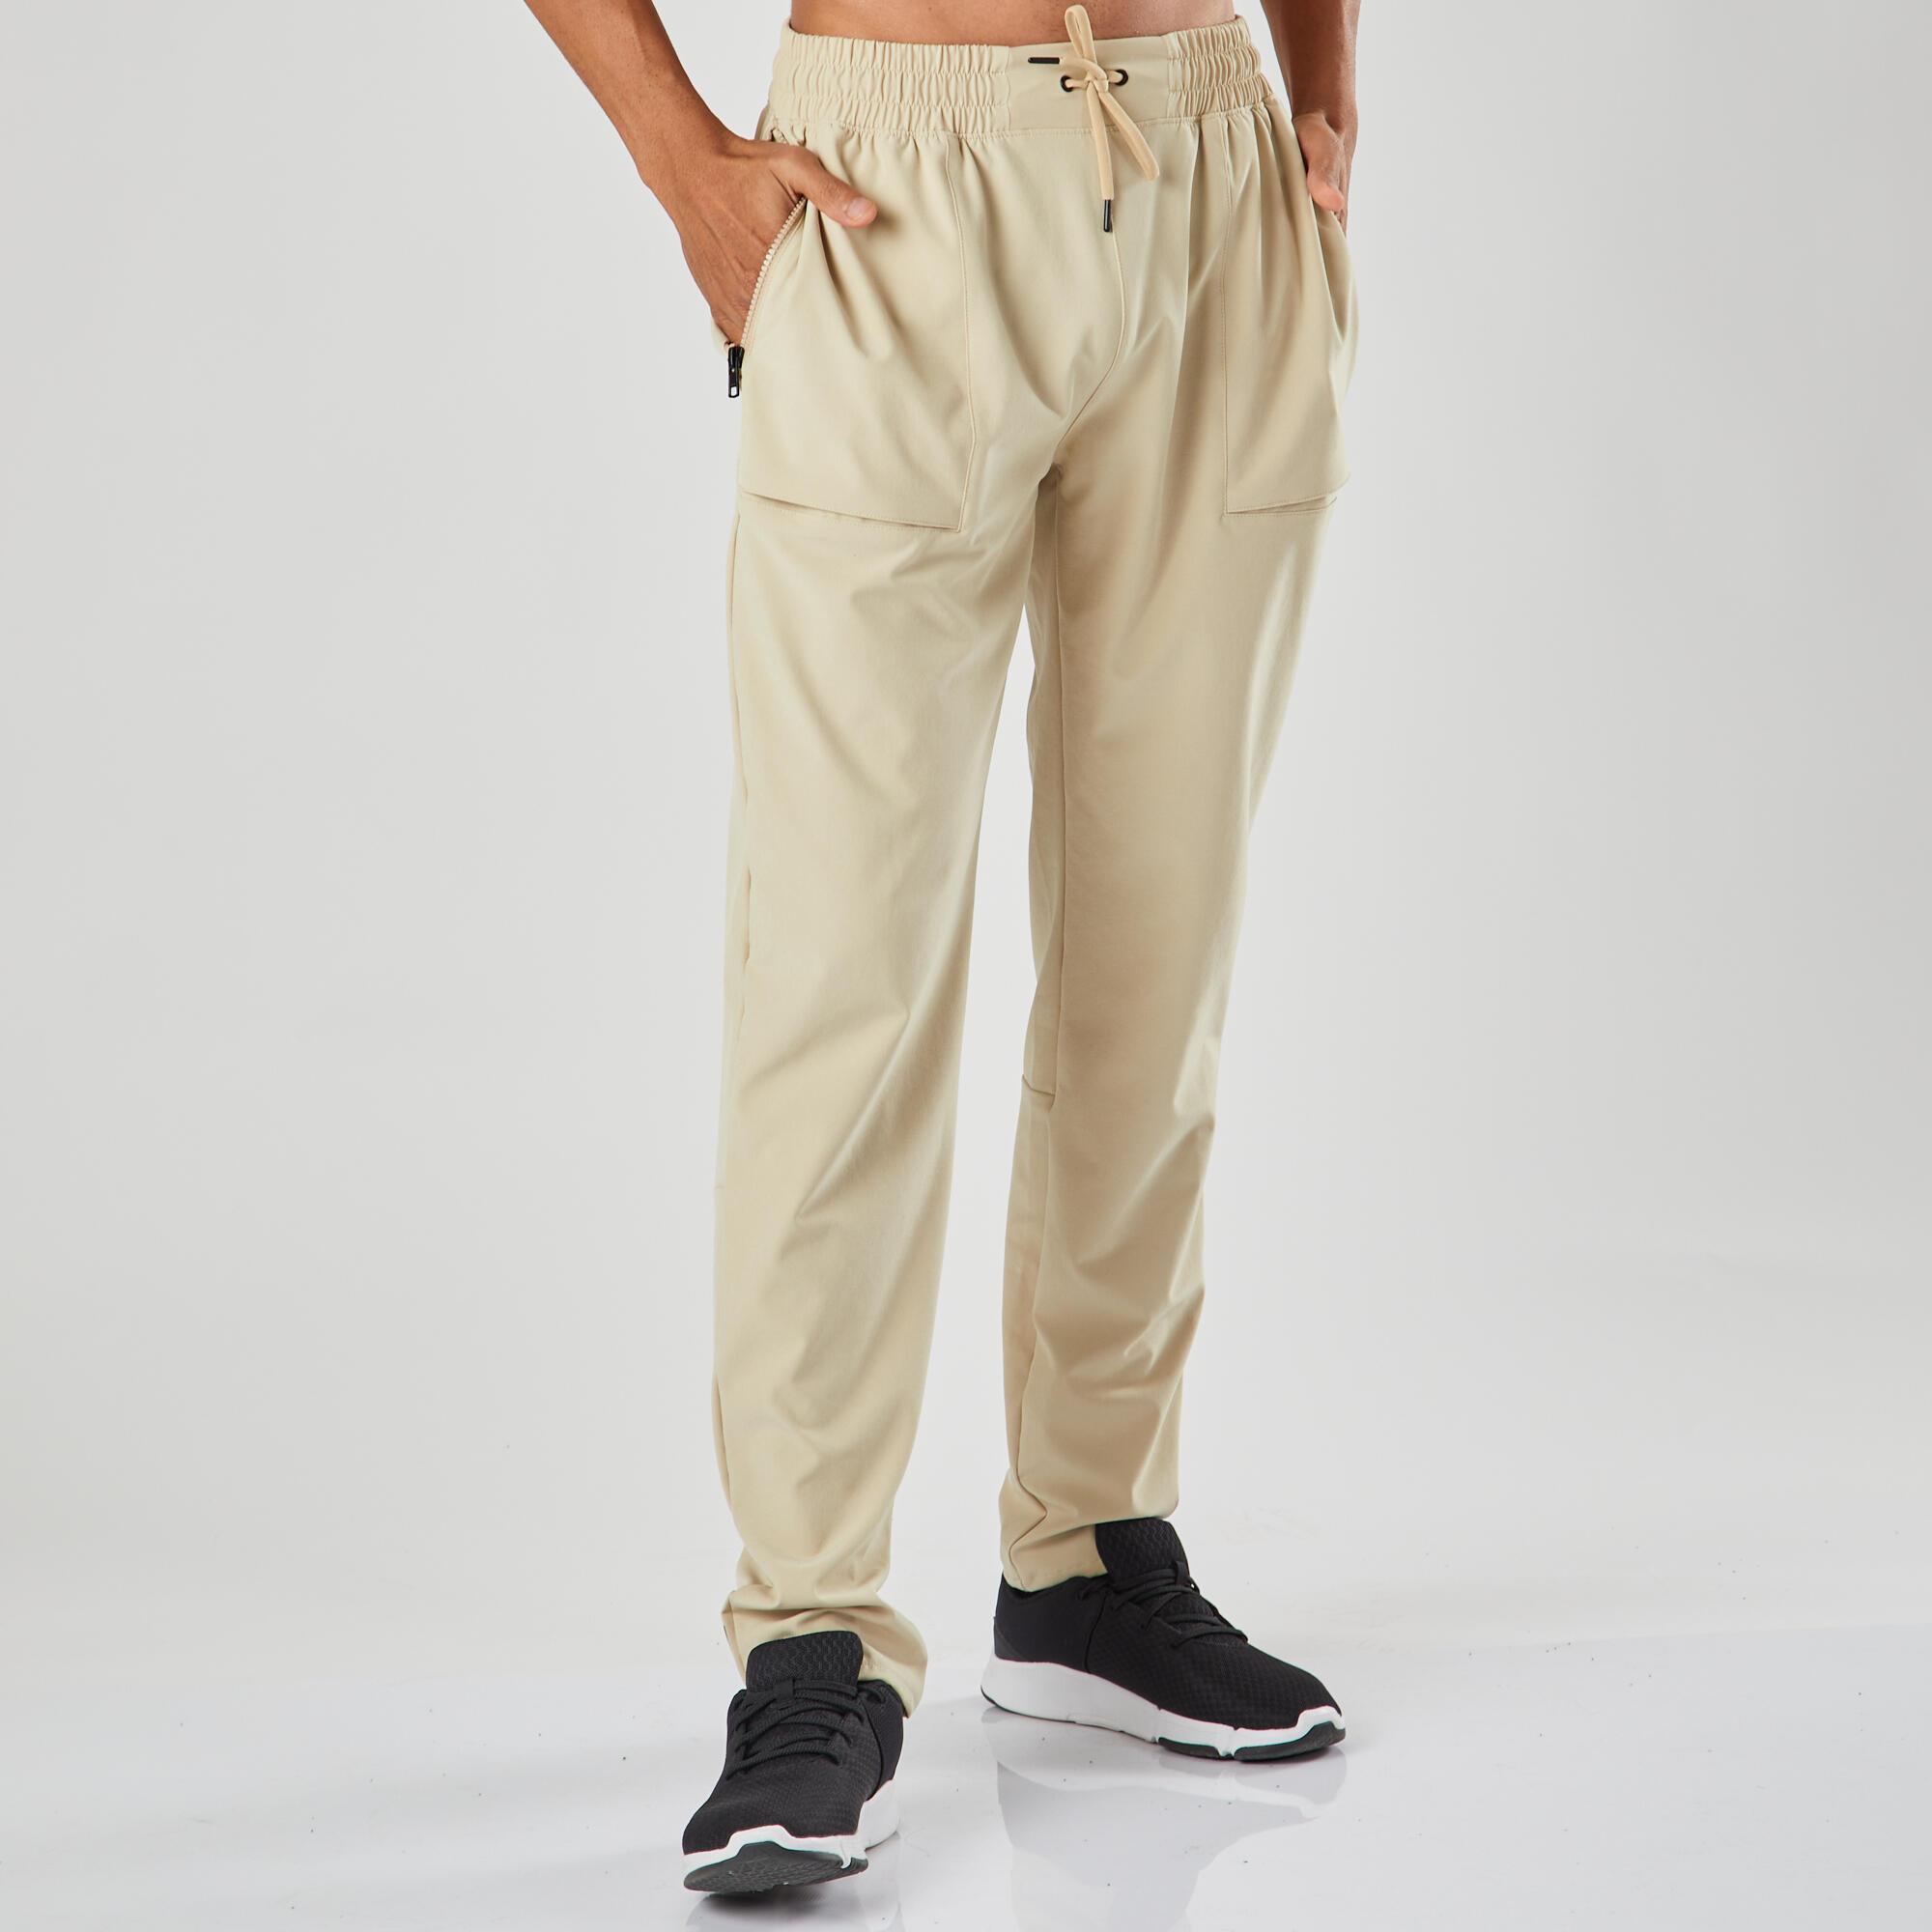 Trendy Joggers for women